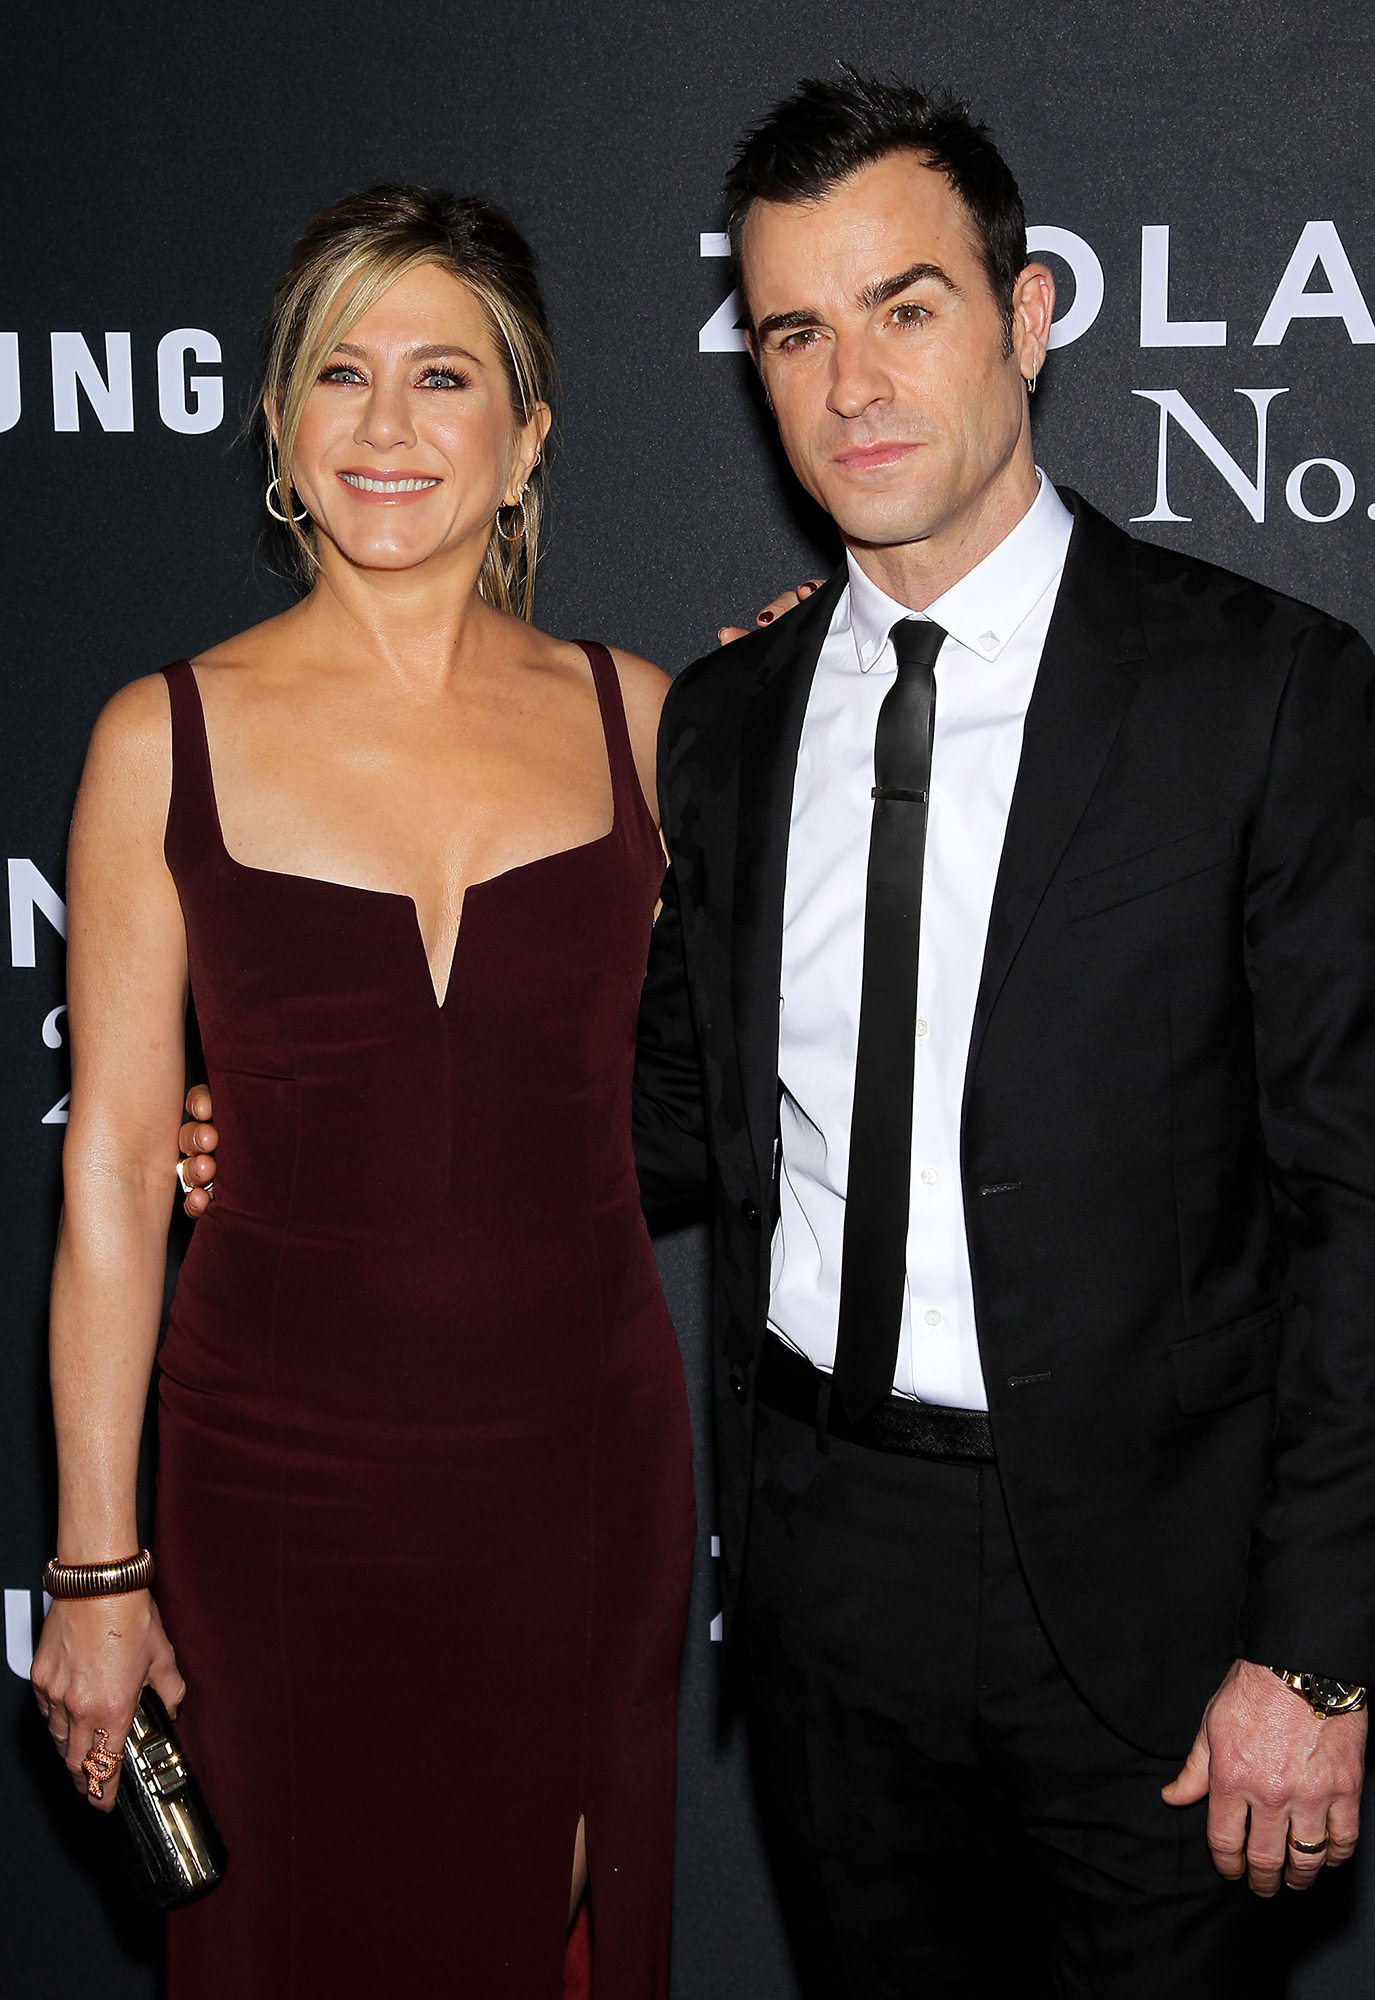 Jennifer Aniston Says Romantic Relationships Are Difficult for